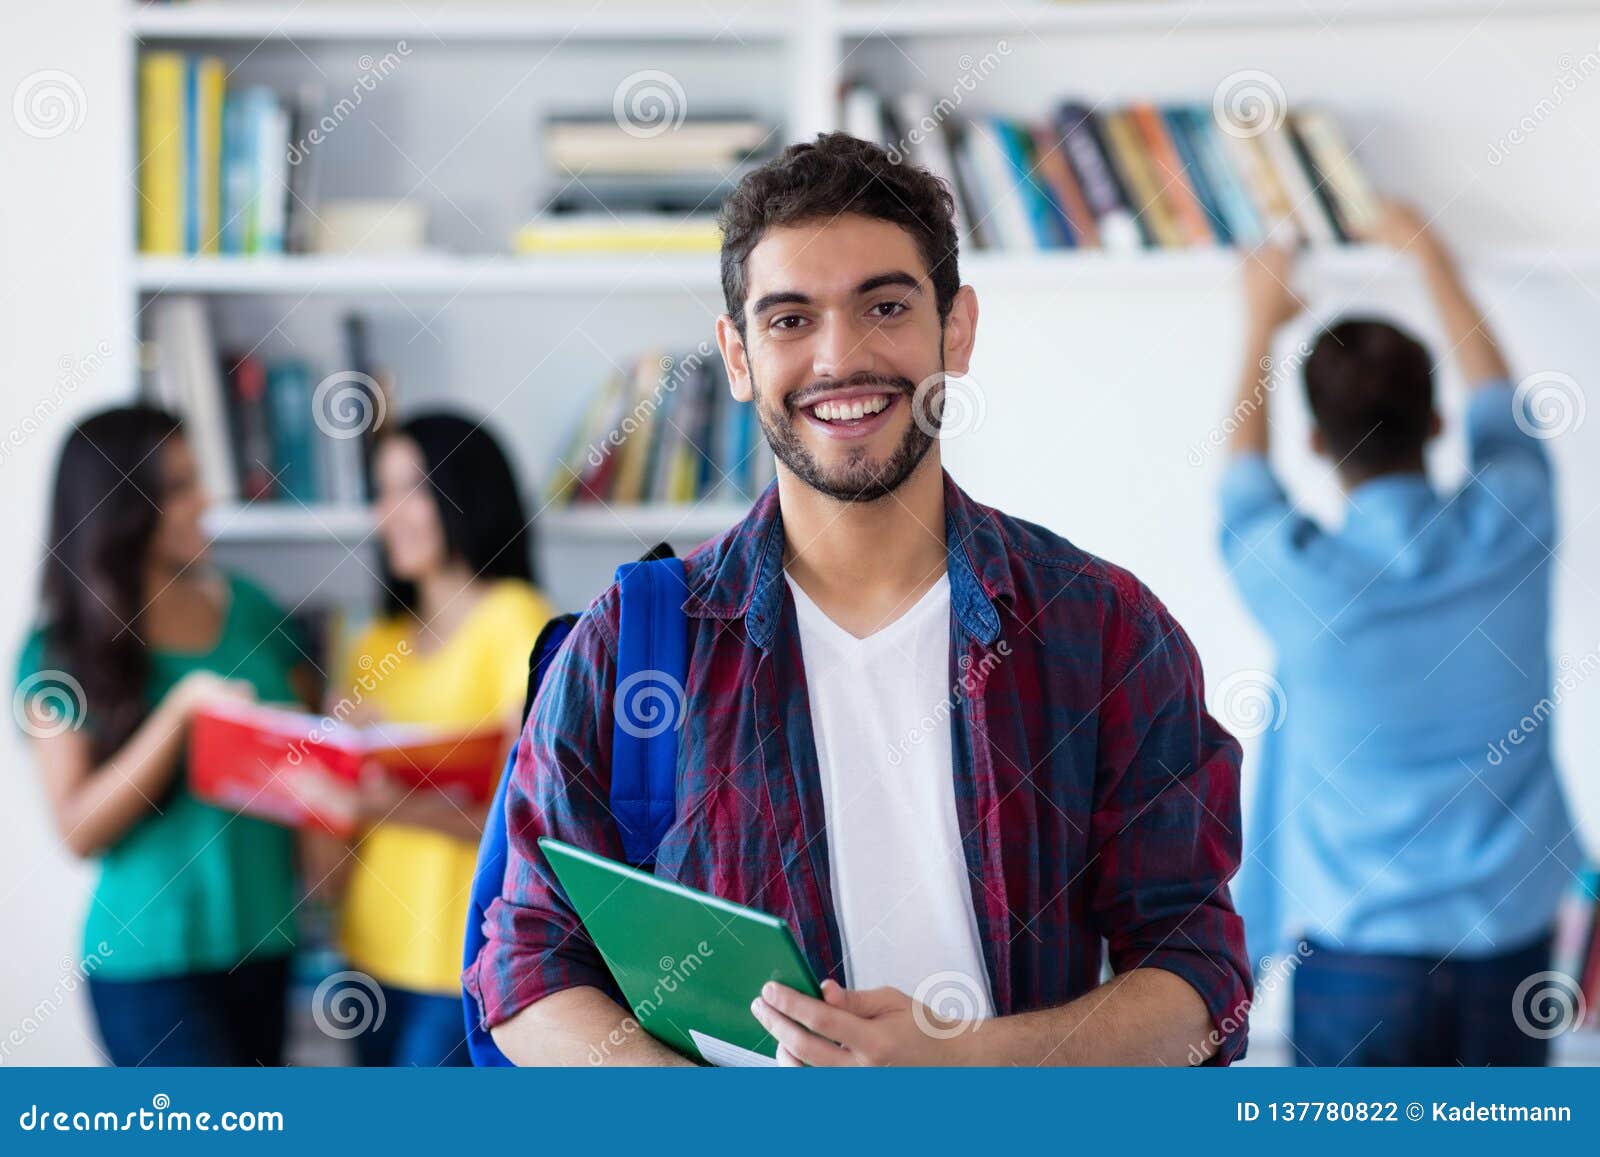 laughing spanish male student with group of students